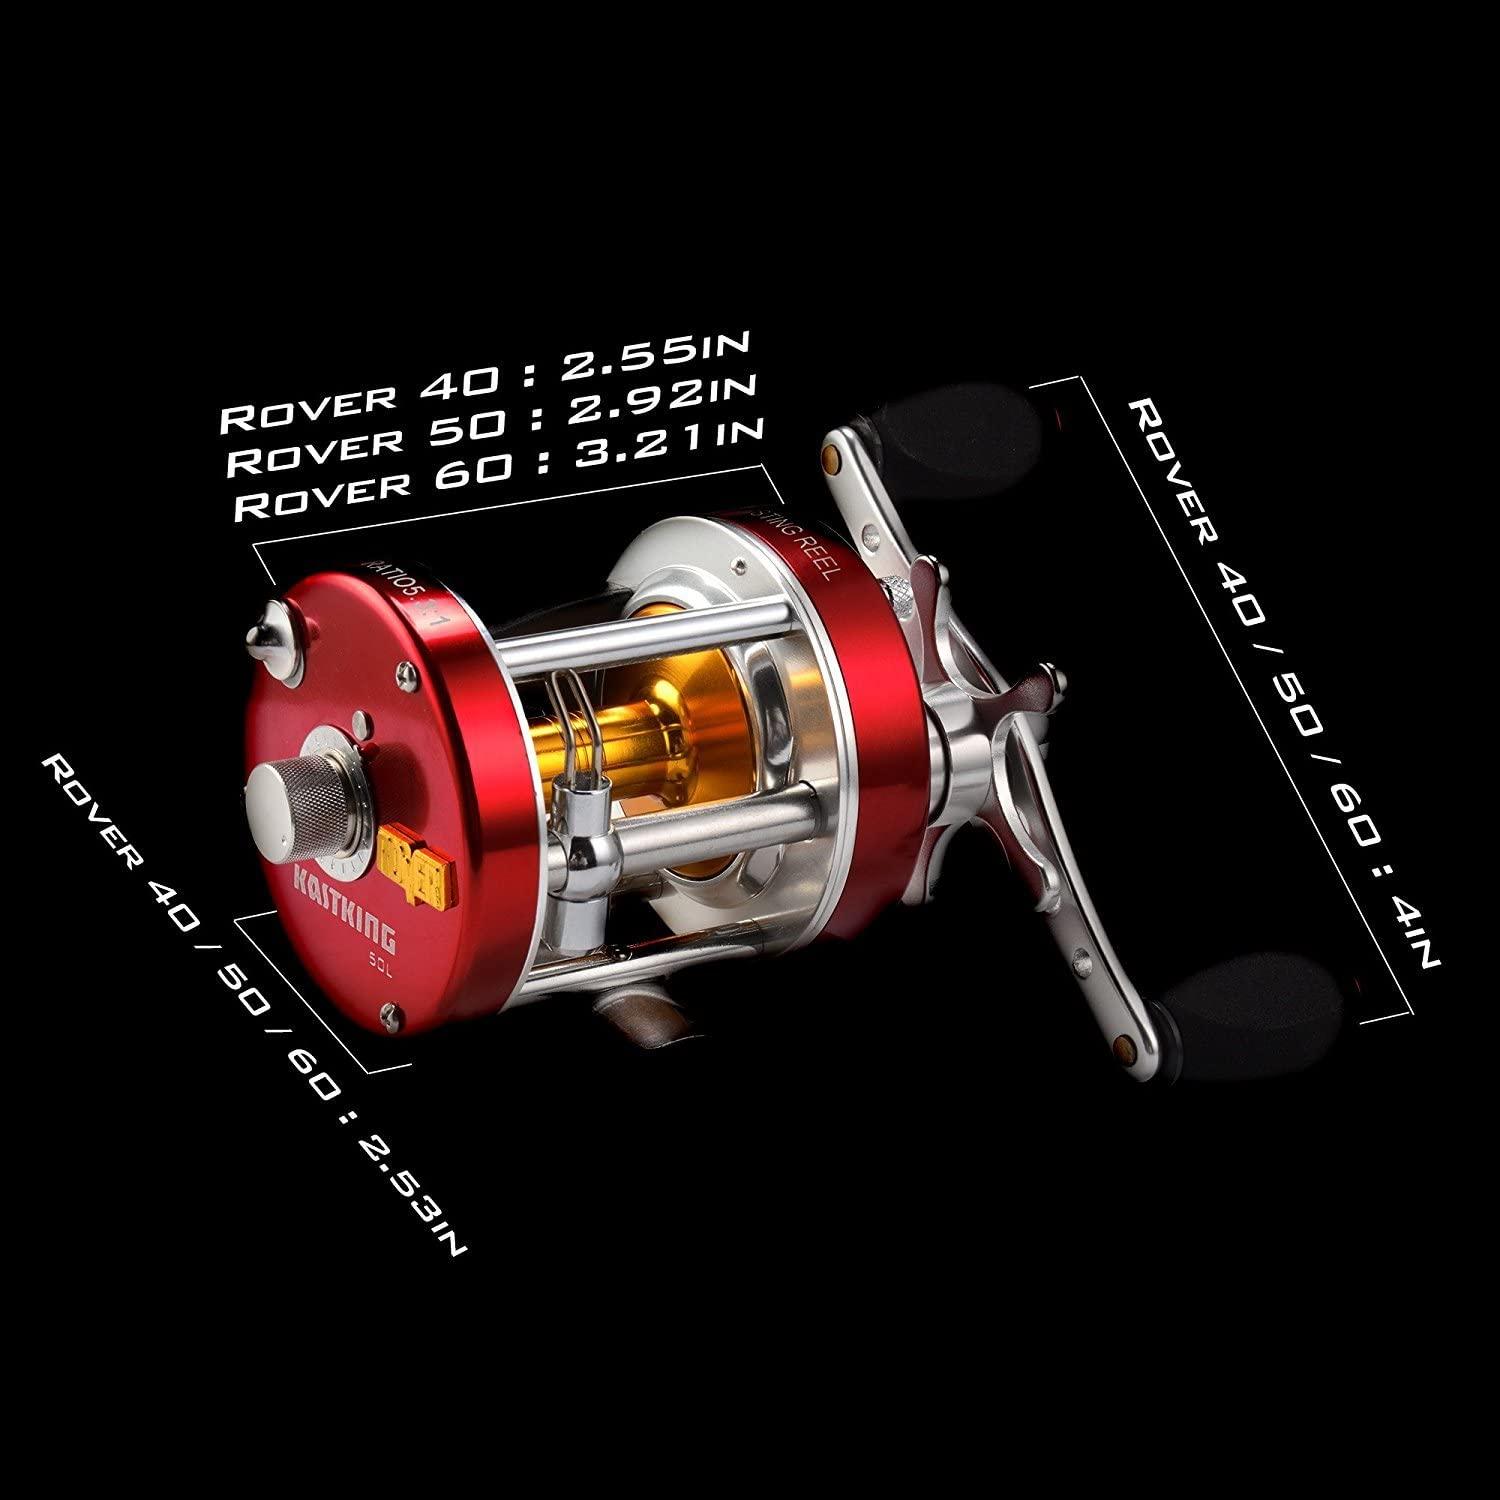 KastKing Rover Round Baitcasting Reel, Perfect Conventional Reel